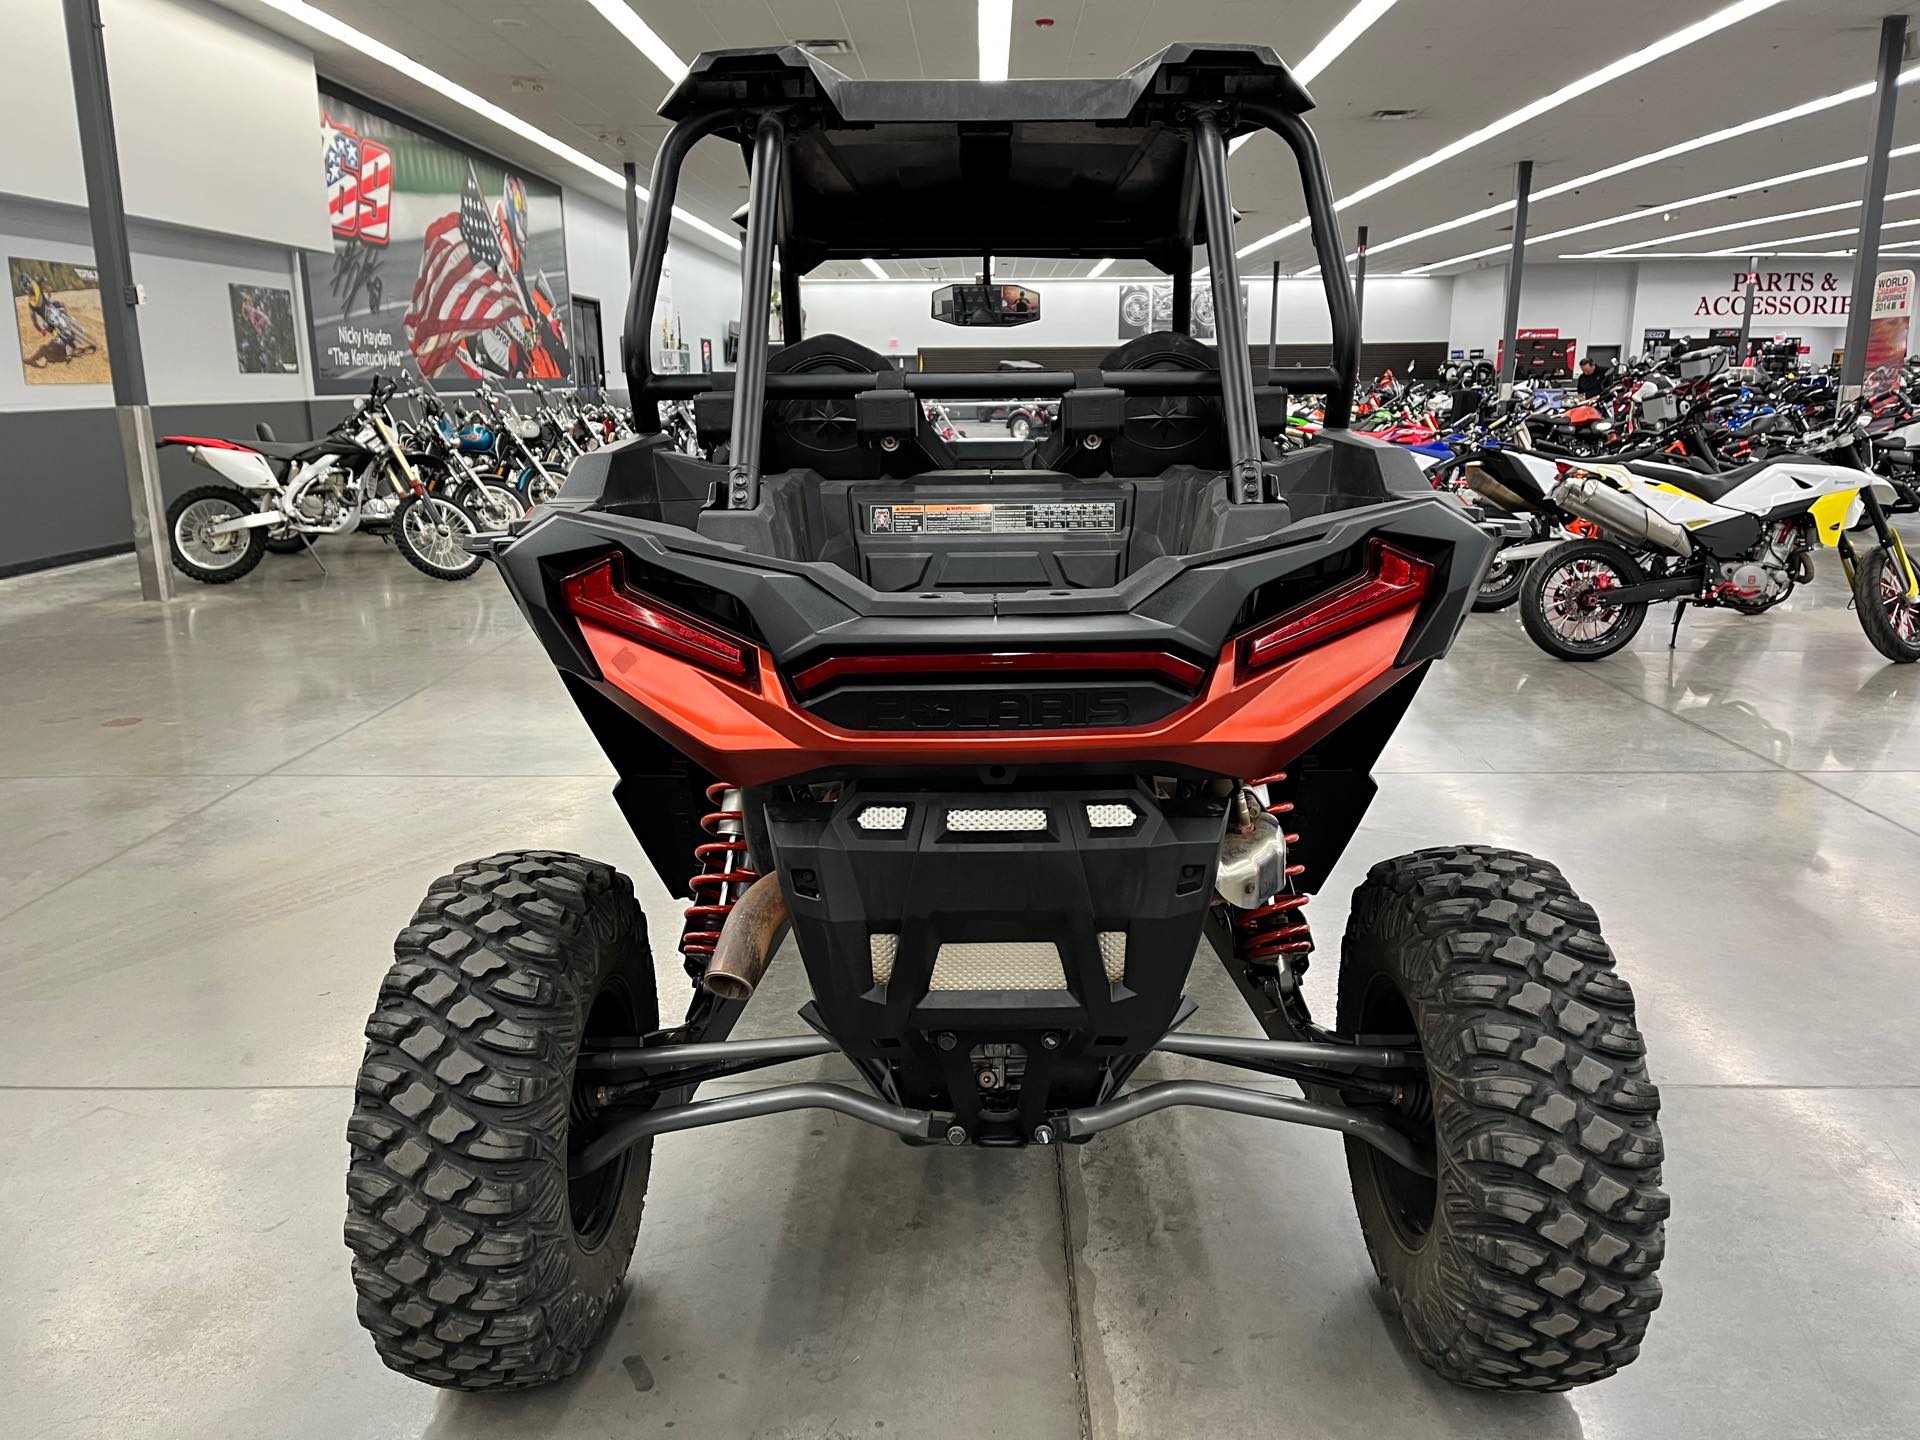 2022 Polaris RZR XP 1000 Trails and Rocks Edition at Aces Motorcycles - Denver